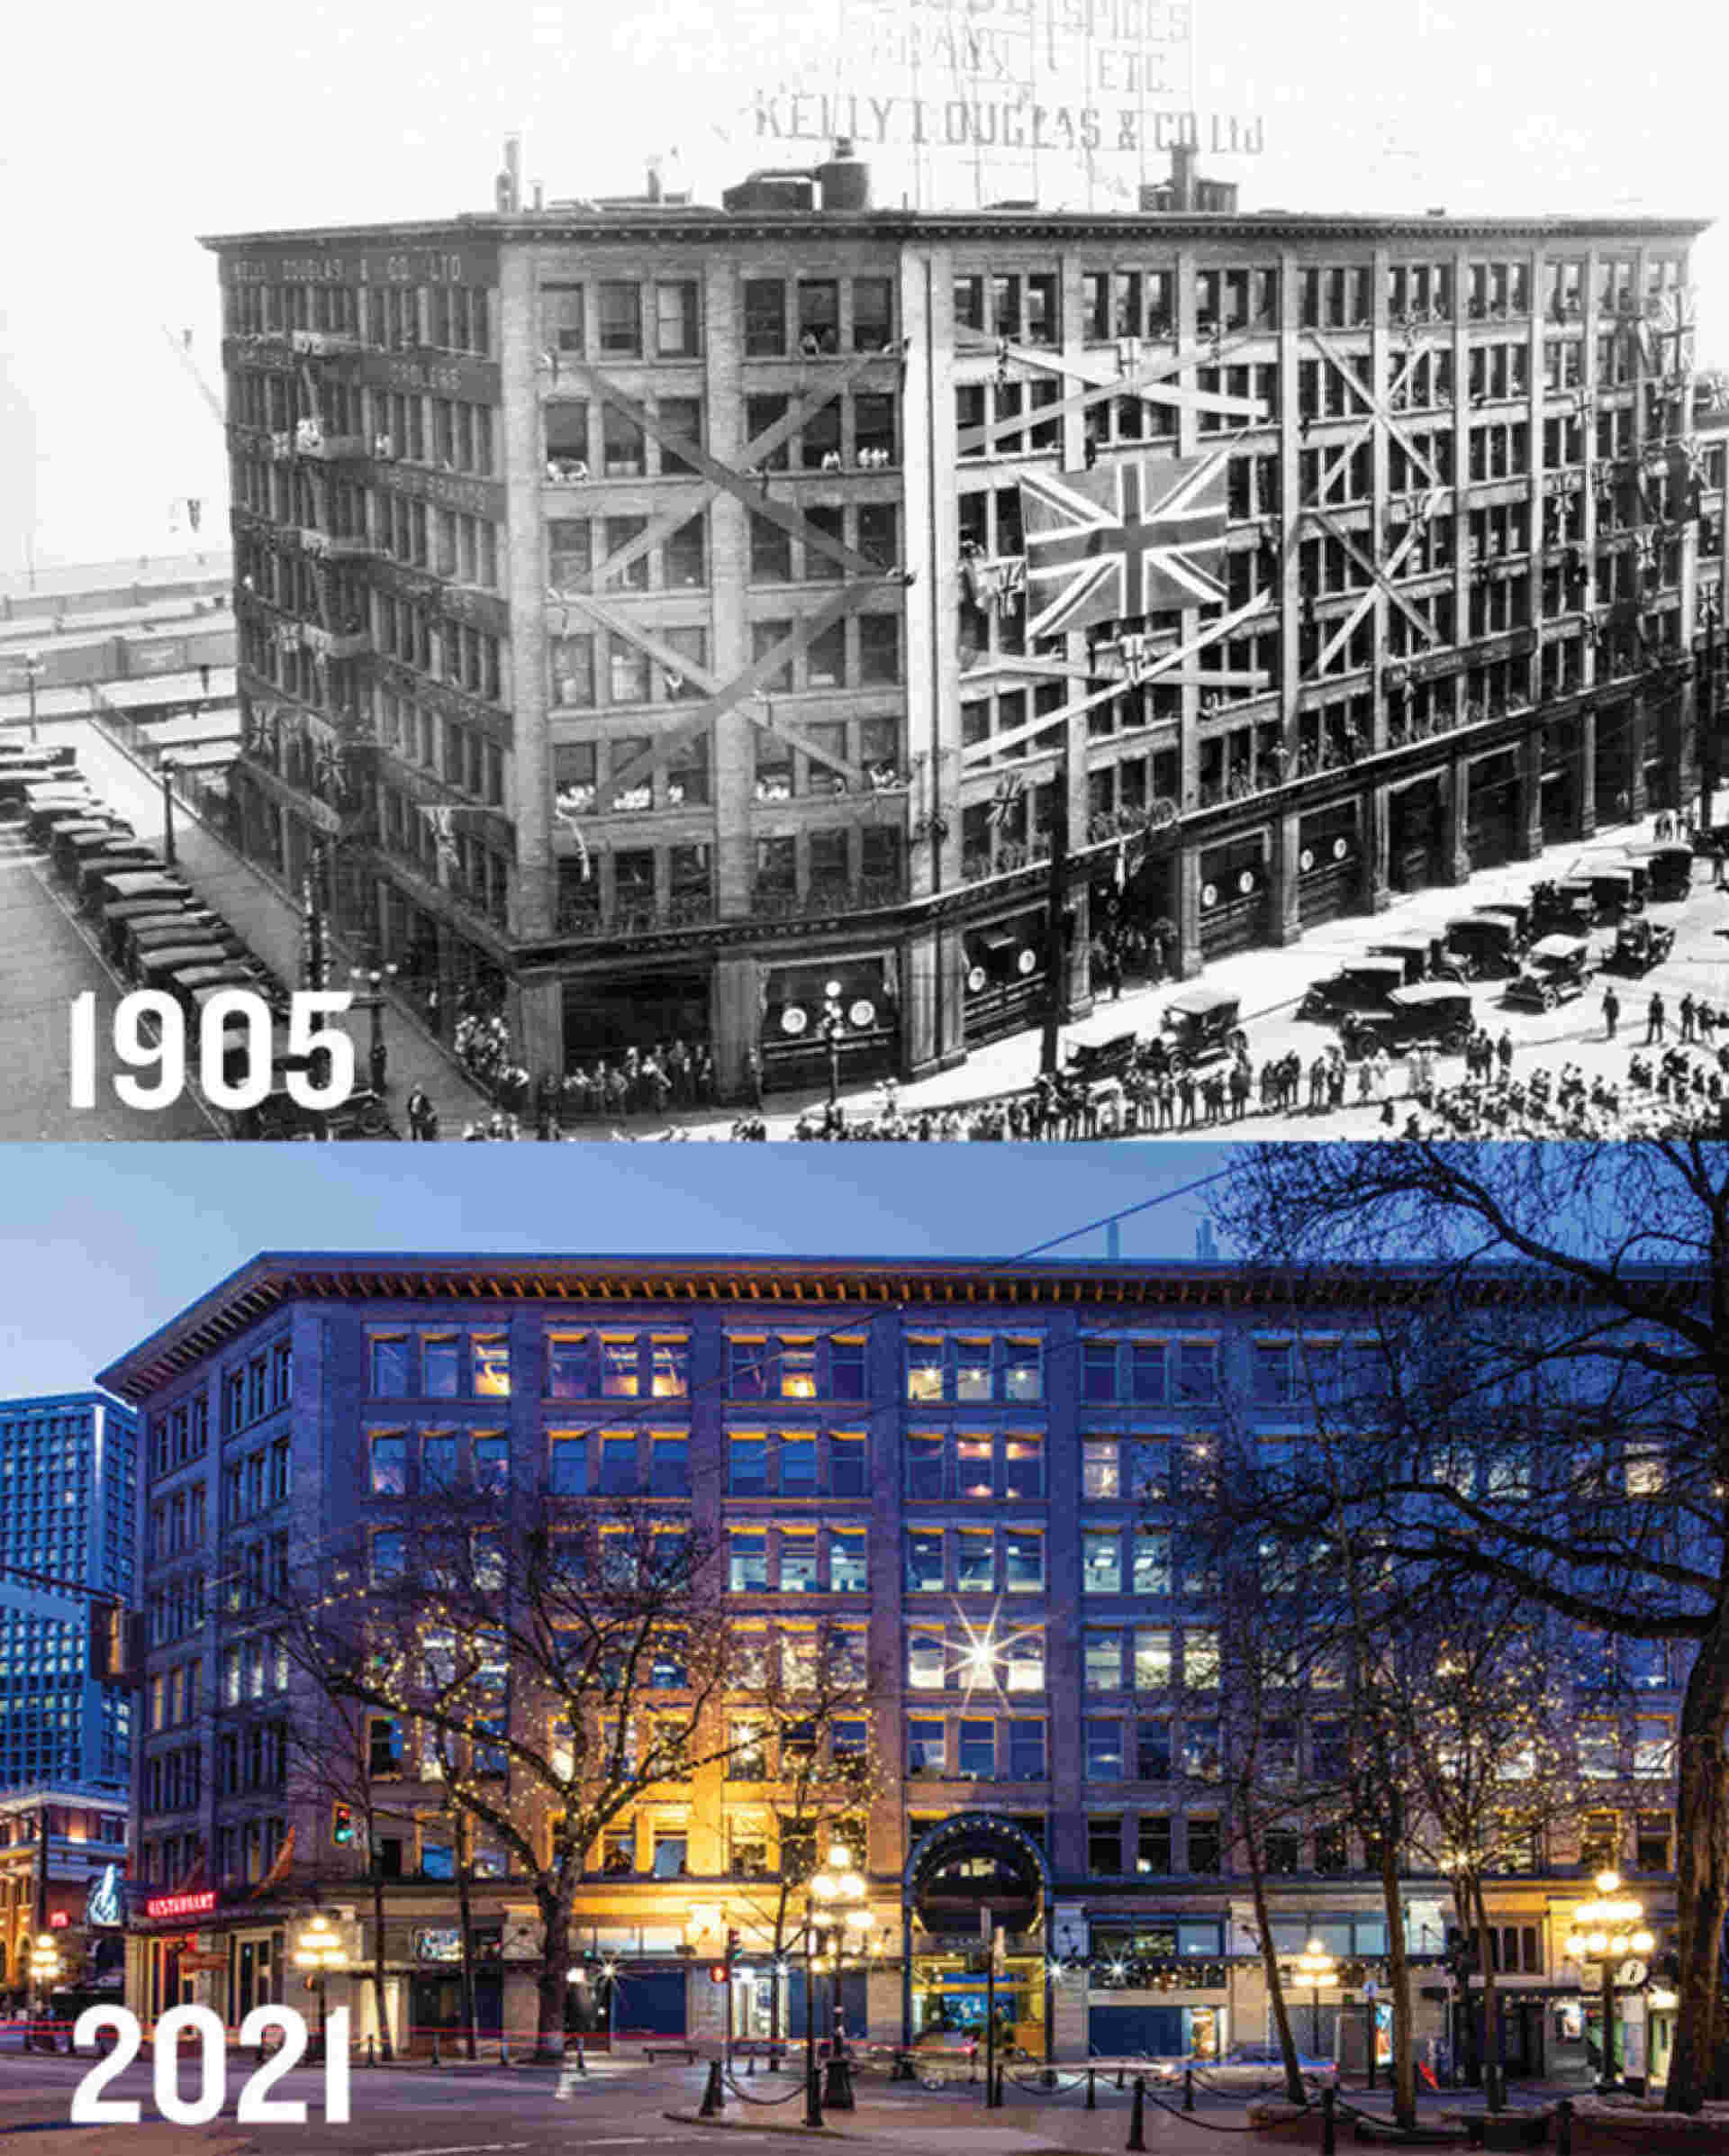 Postcard from the Past - kelly-douglas-and-co-building-comparision